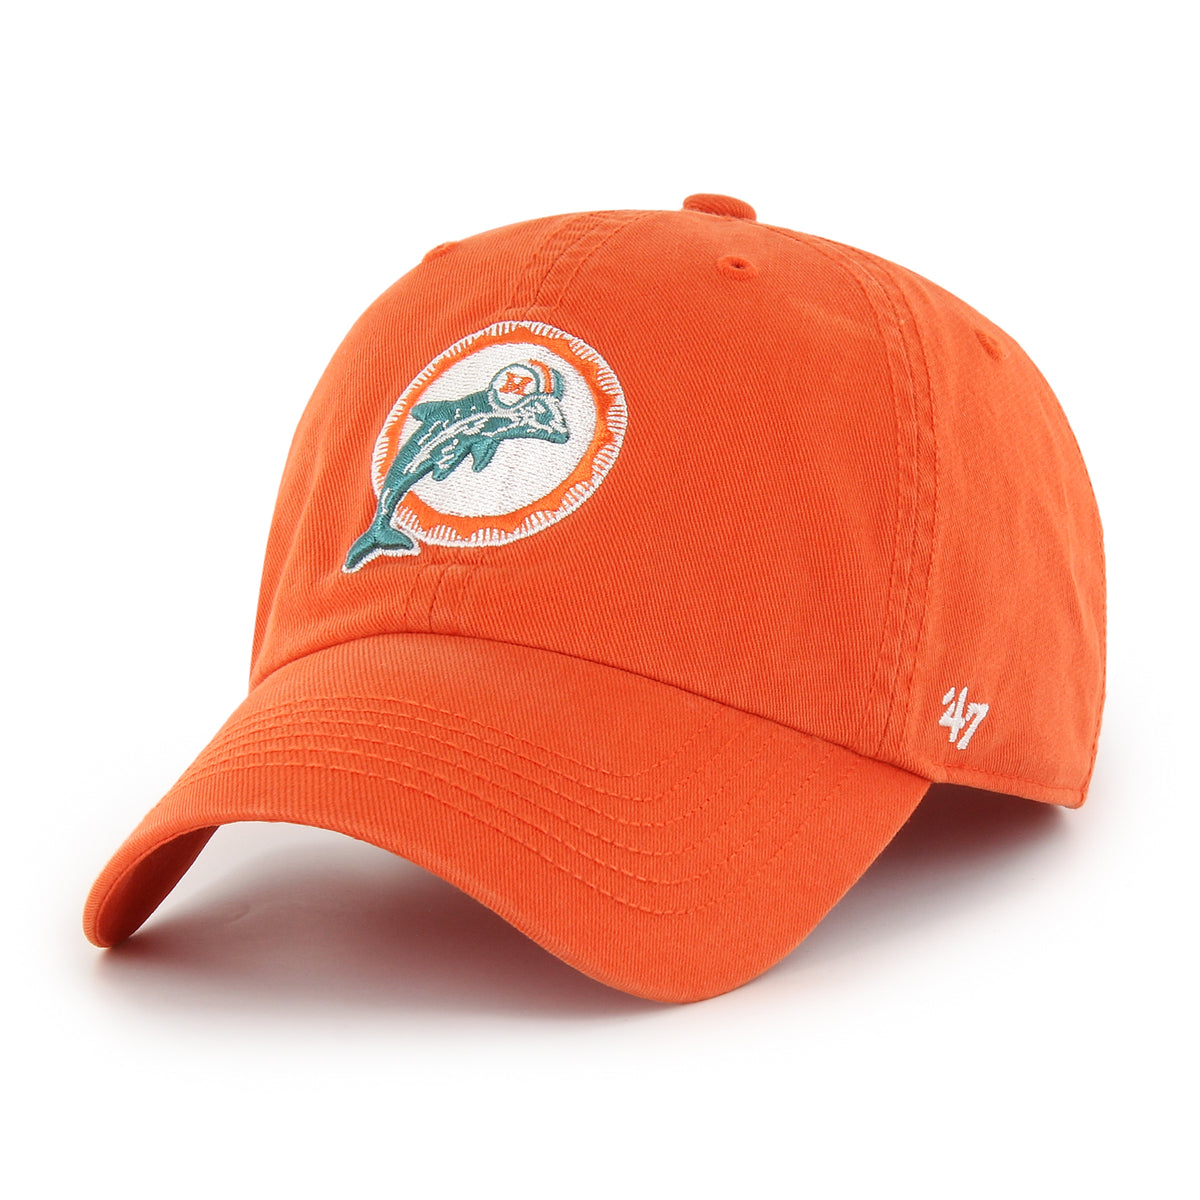 MIAMI DOLPHINS HISTORIC CLASSIC '47 FRANCHISE